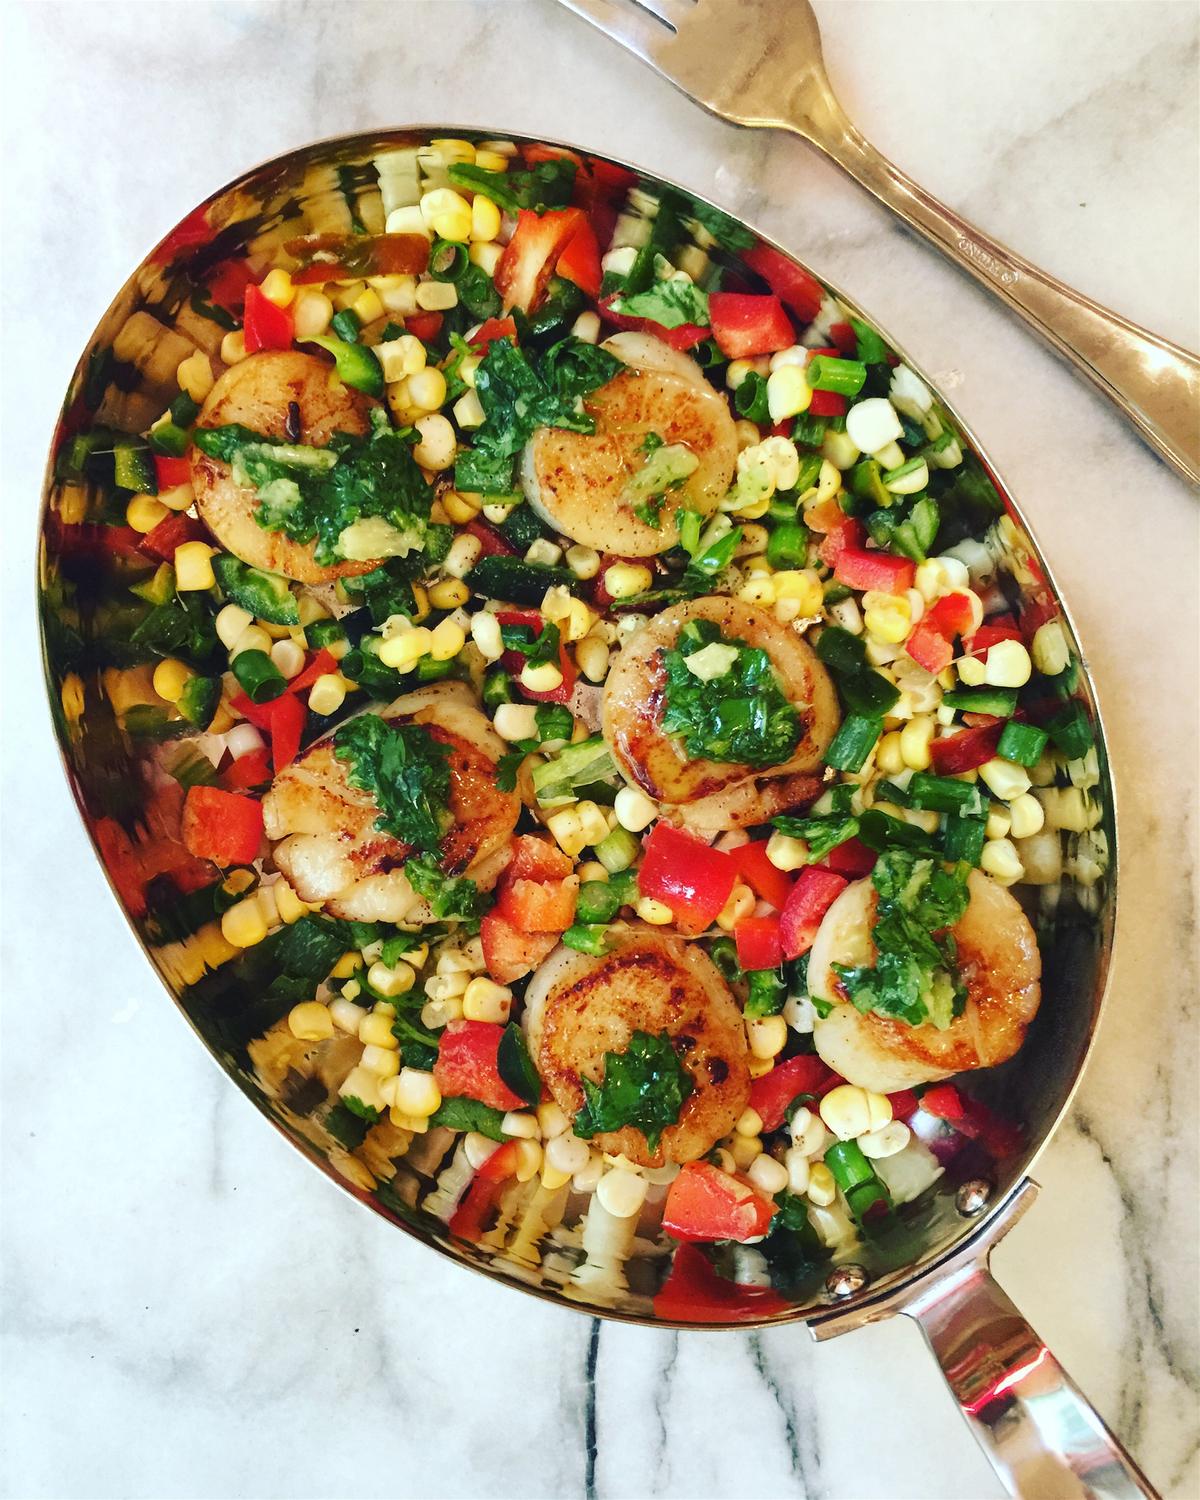 Scallops' natural sweetness is complemented by bright citrus and crisp, sweet corn and bell peppers, which make them a delightful summer meal. (Lynda Balslev for Tastefood)